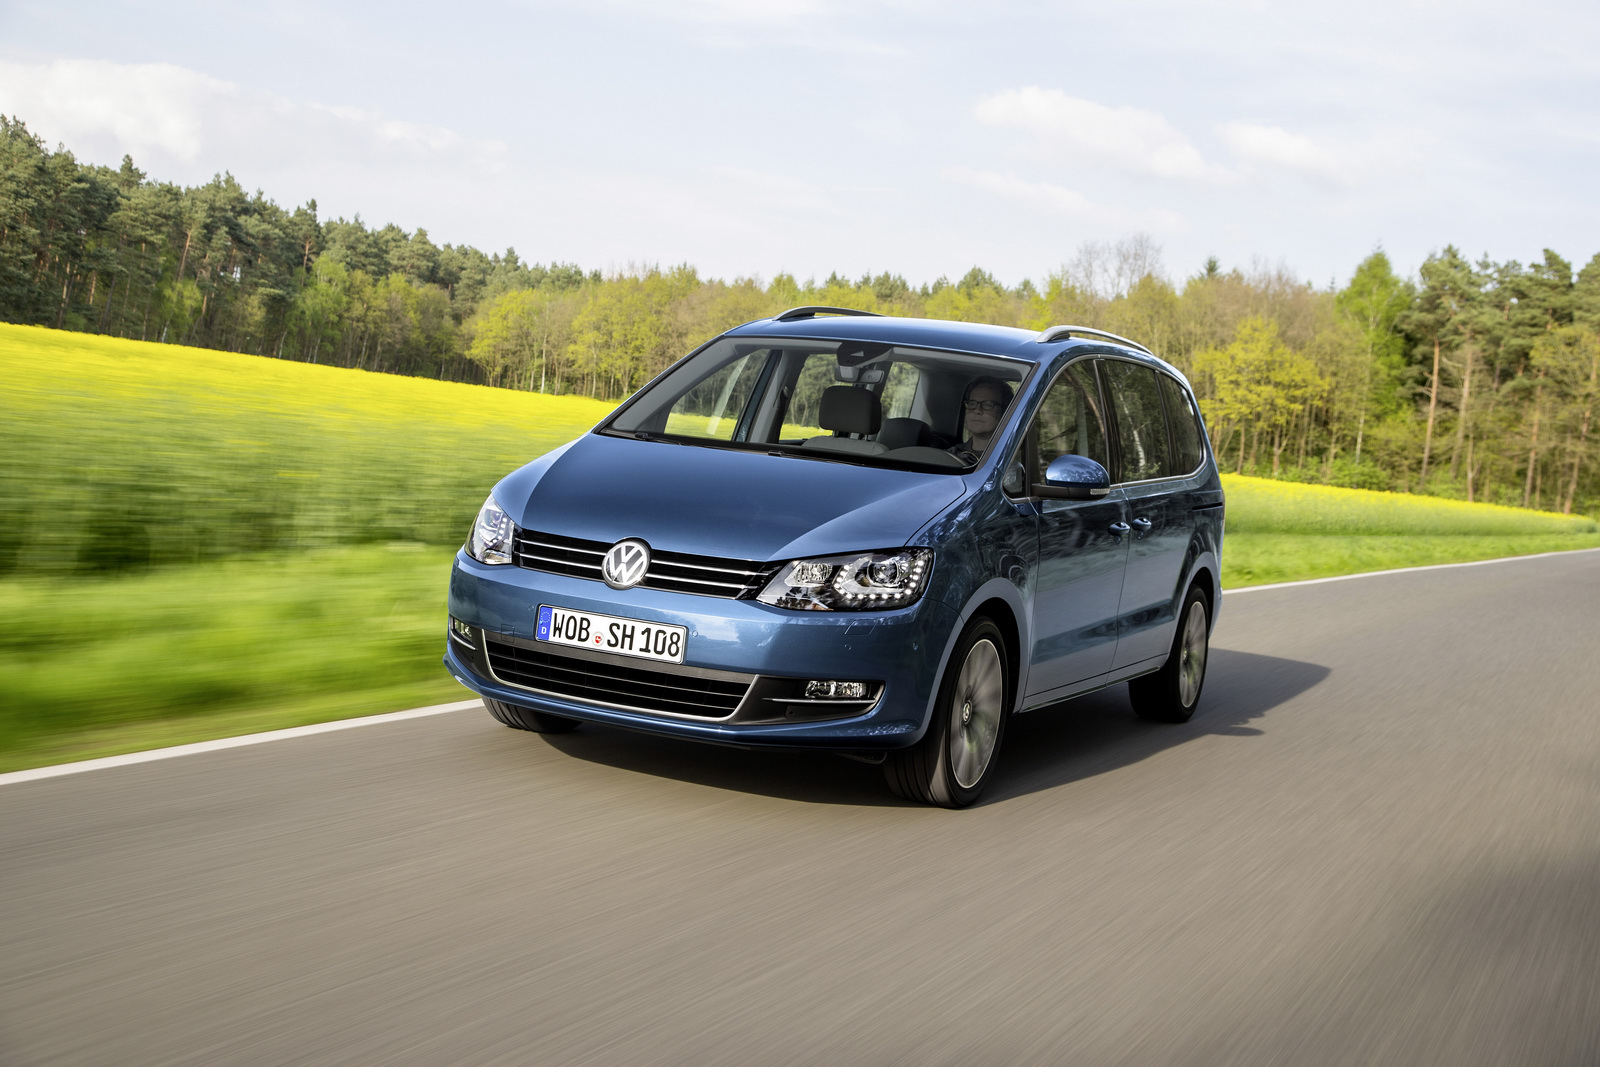 Volkswagen Sharan Final Edition - Last Few Stock Vehicles Available -  Brotherwood